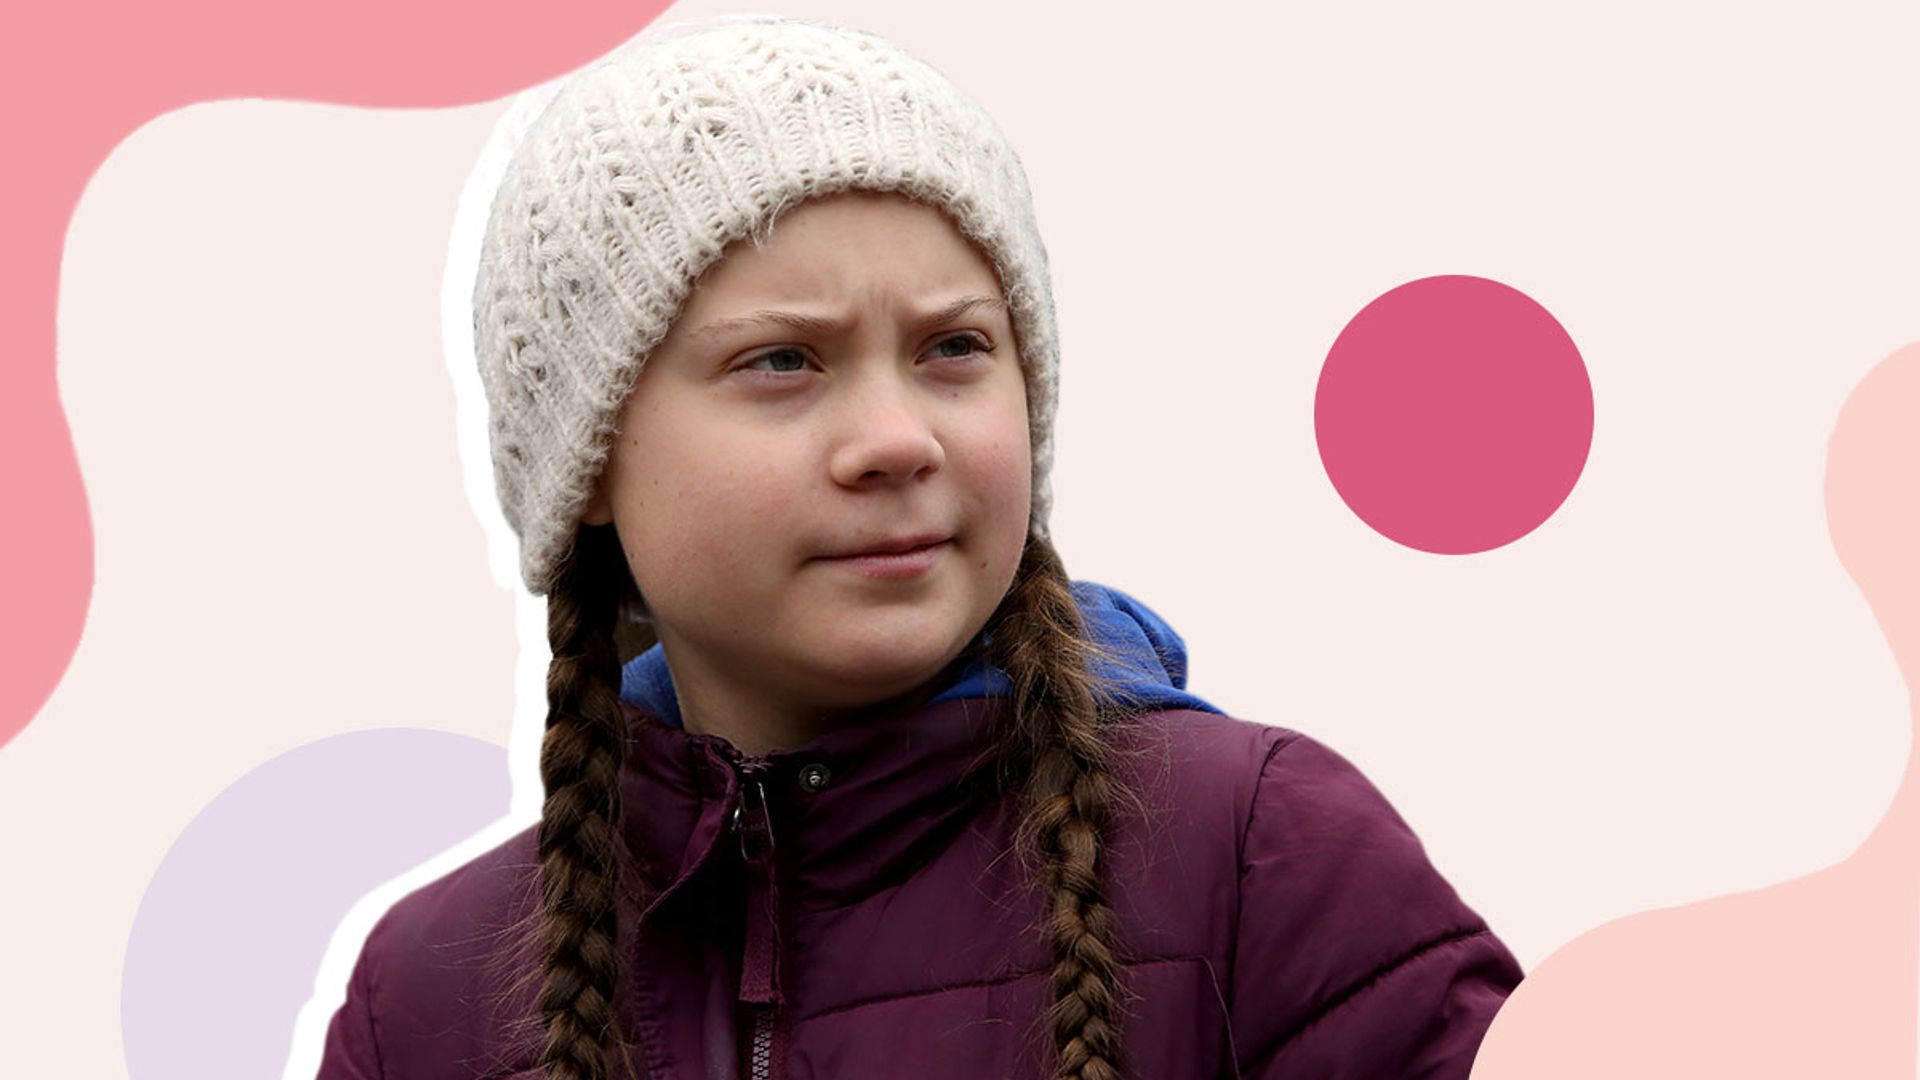 Greta Thunberg is the 16-year-old environmentalist we NEED to listen to